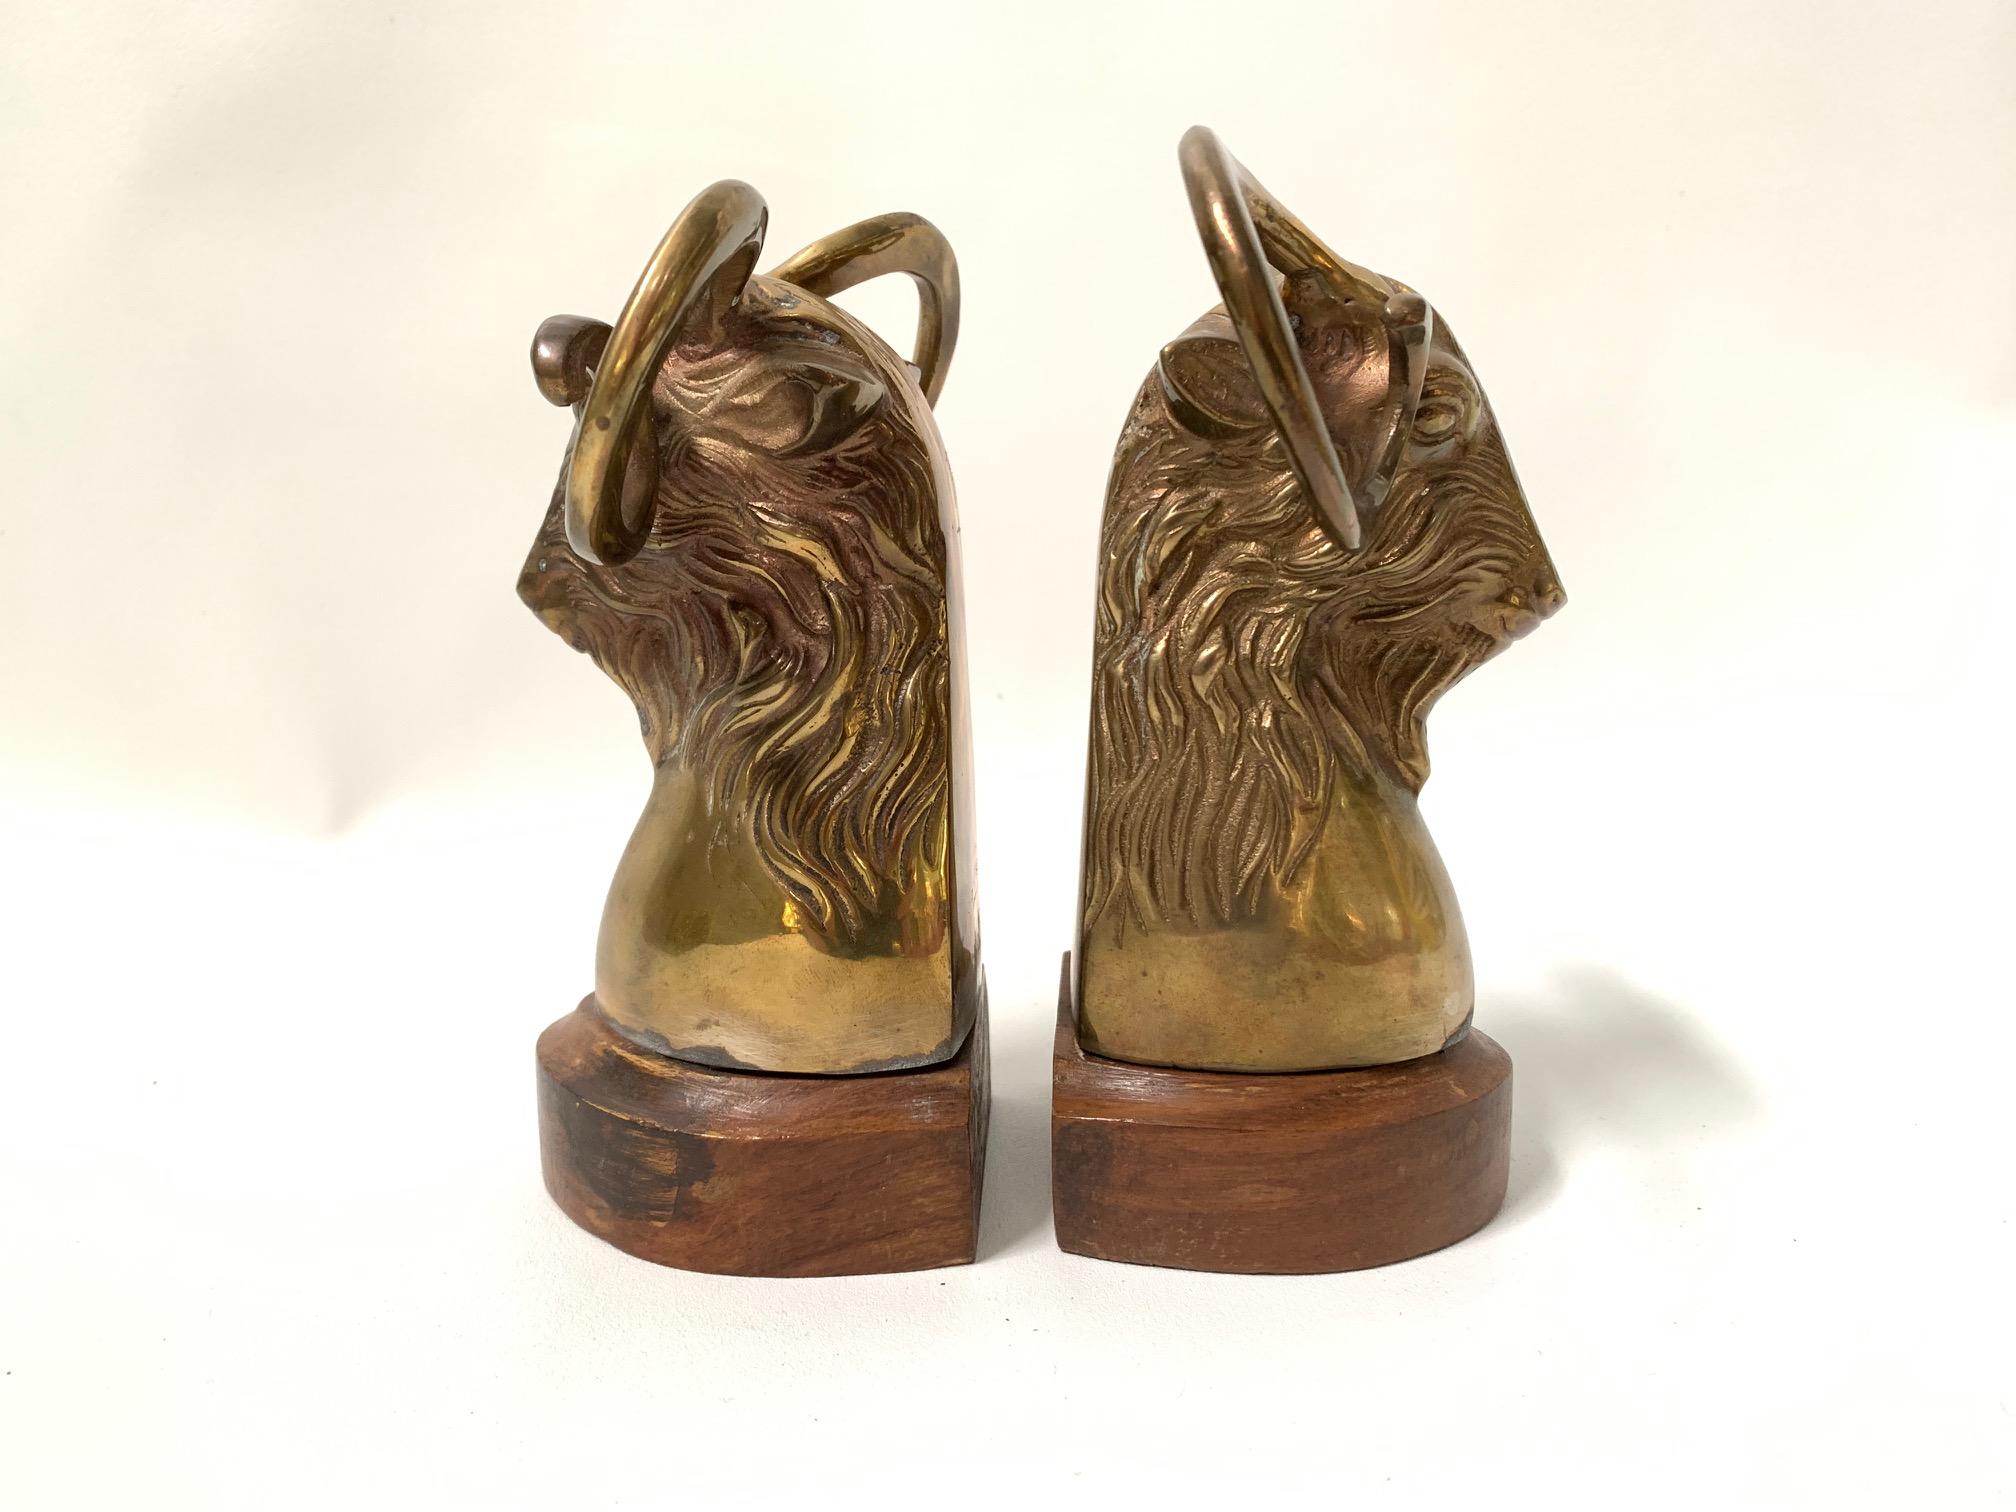 Pair of solid brass rams head bookends on wood bases. Made in India. Great as-found vintage condition.